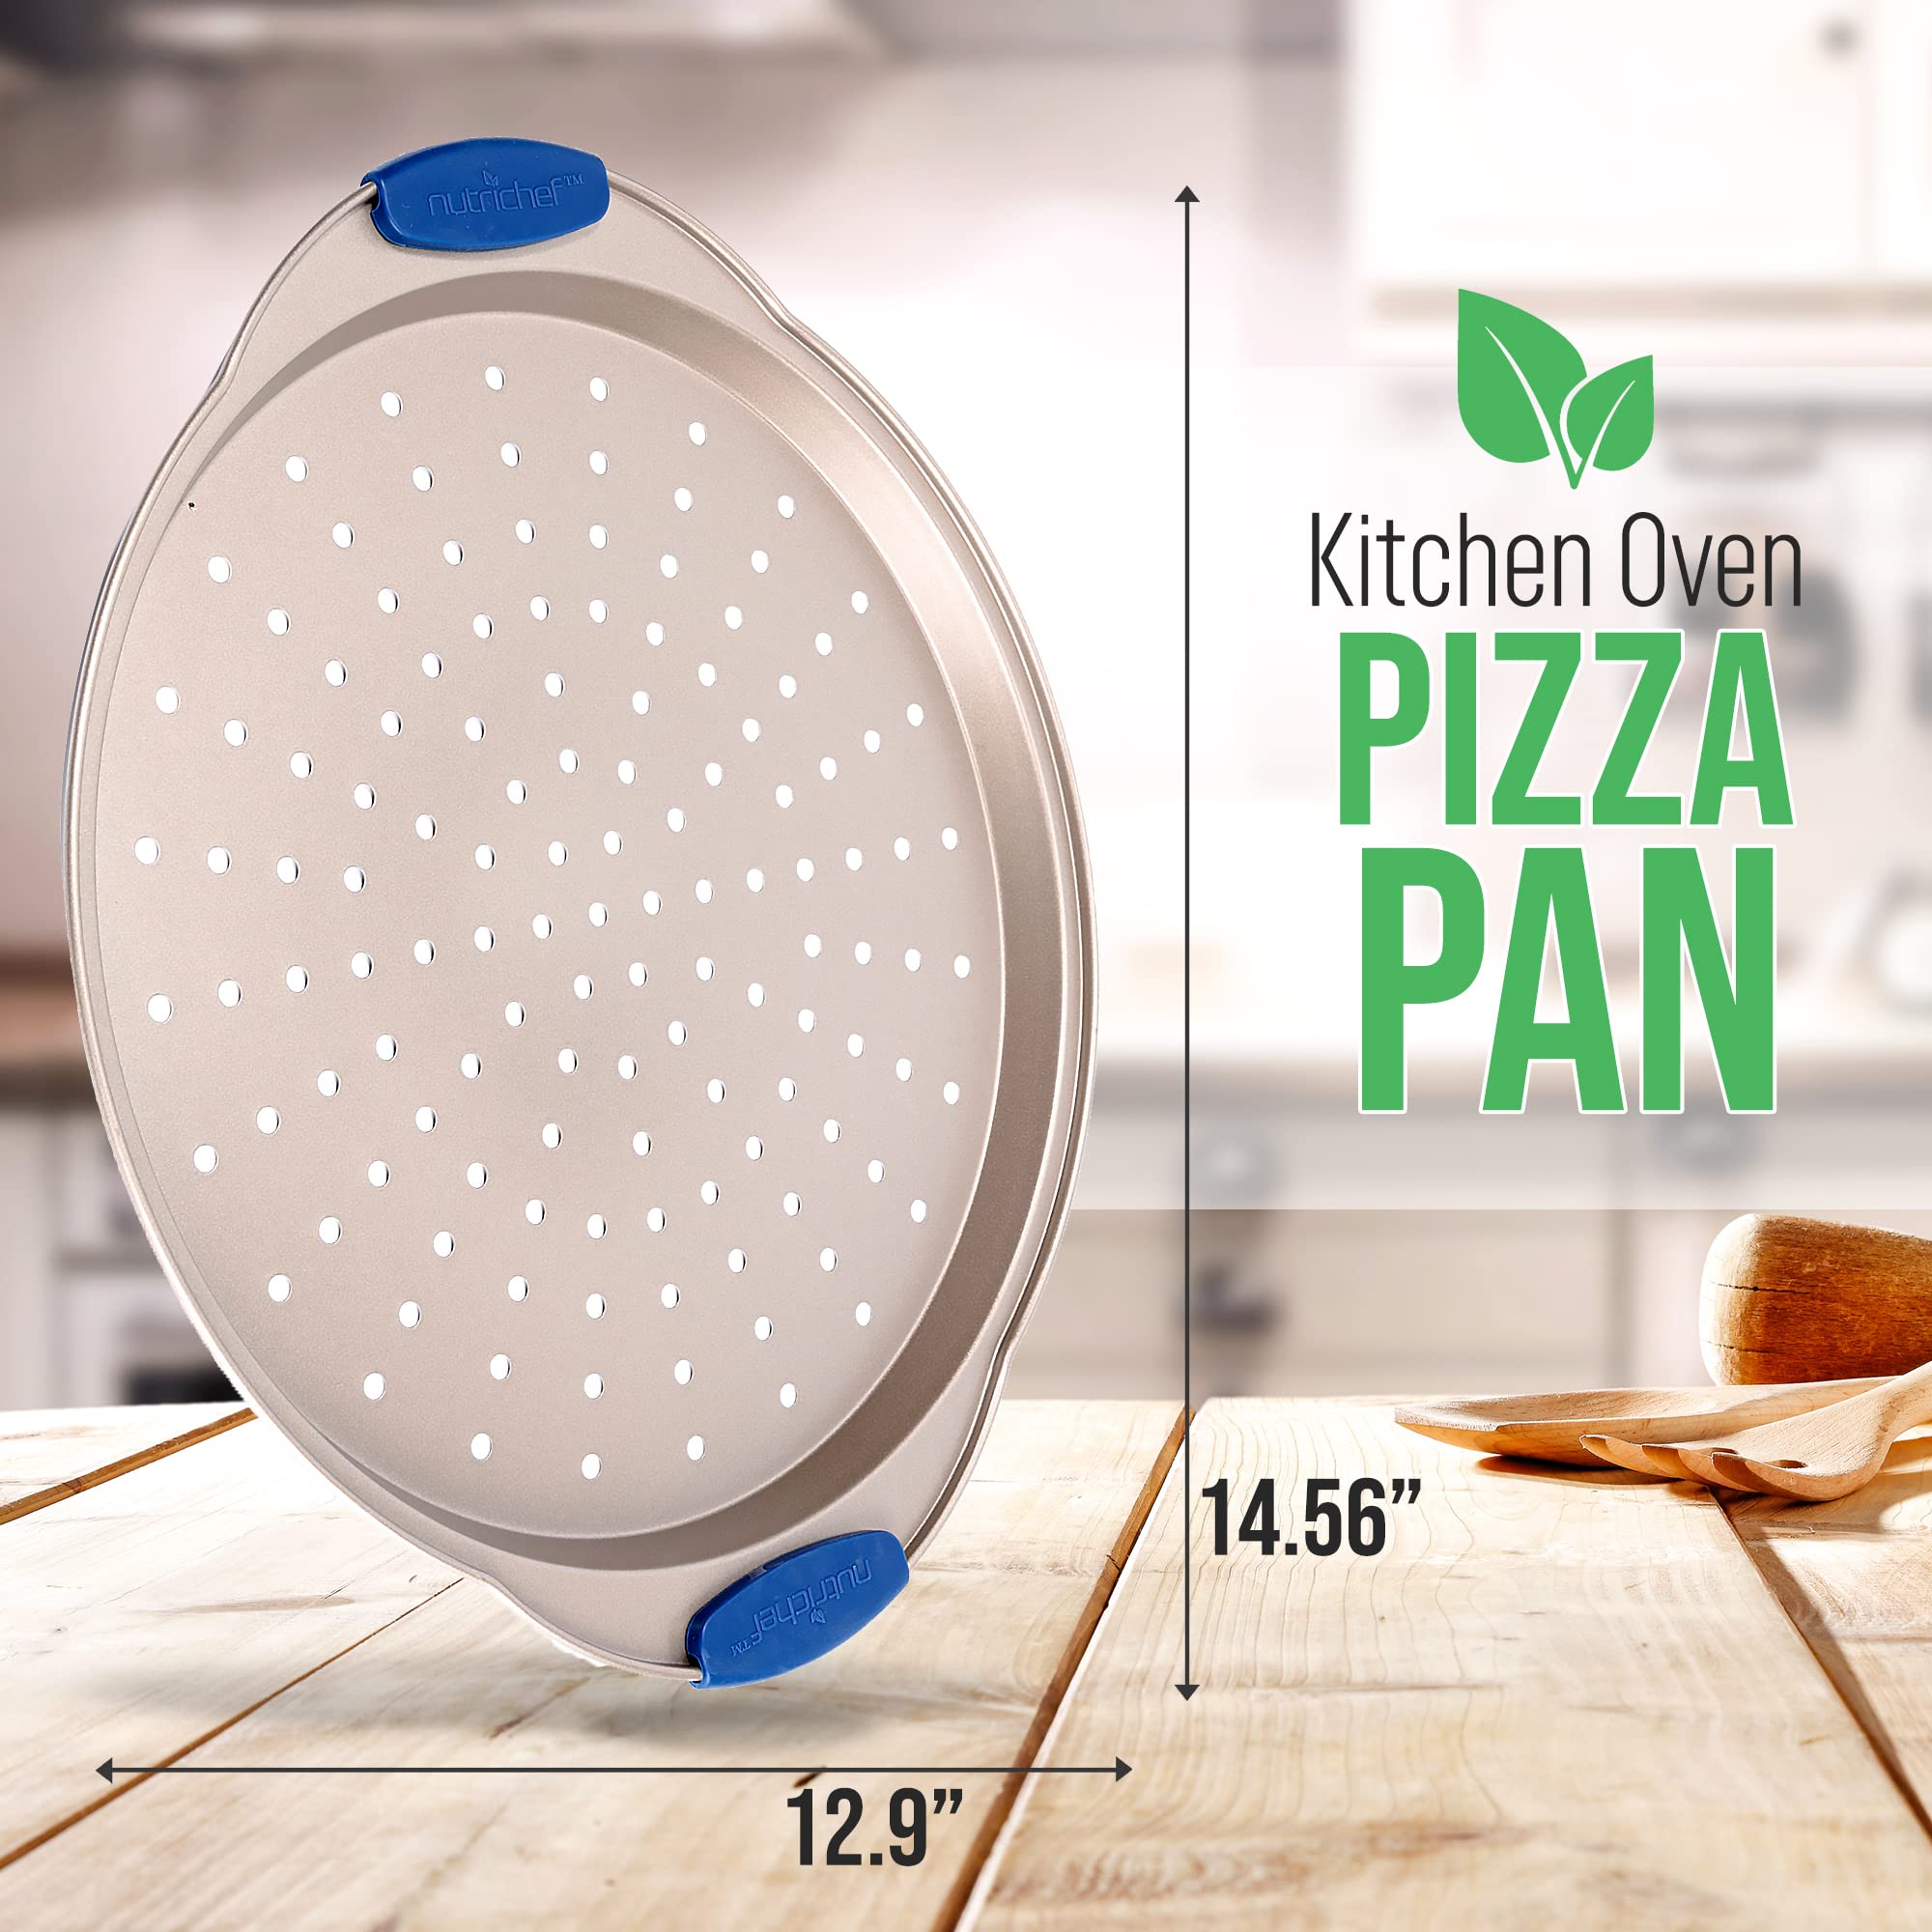 NutriChef Non-Stick Pizza Tray - with Silicone Handle, Round Steel Non-stick Pan with Perforated Holes, Premium Bakeware, Pizza Tray with Silicone and Oversized Handle, Dishwasher Safe - NCBPIZ2